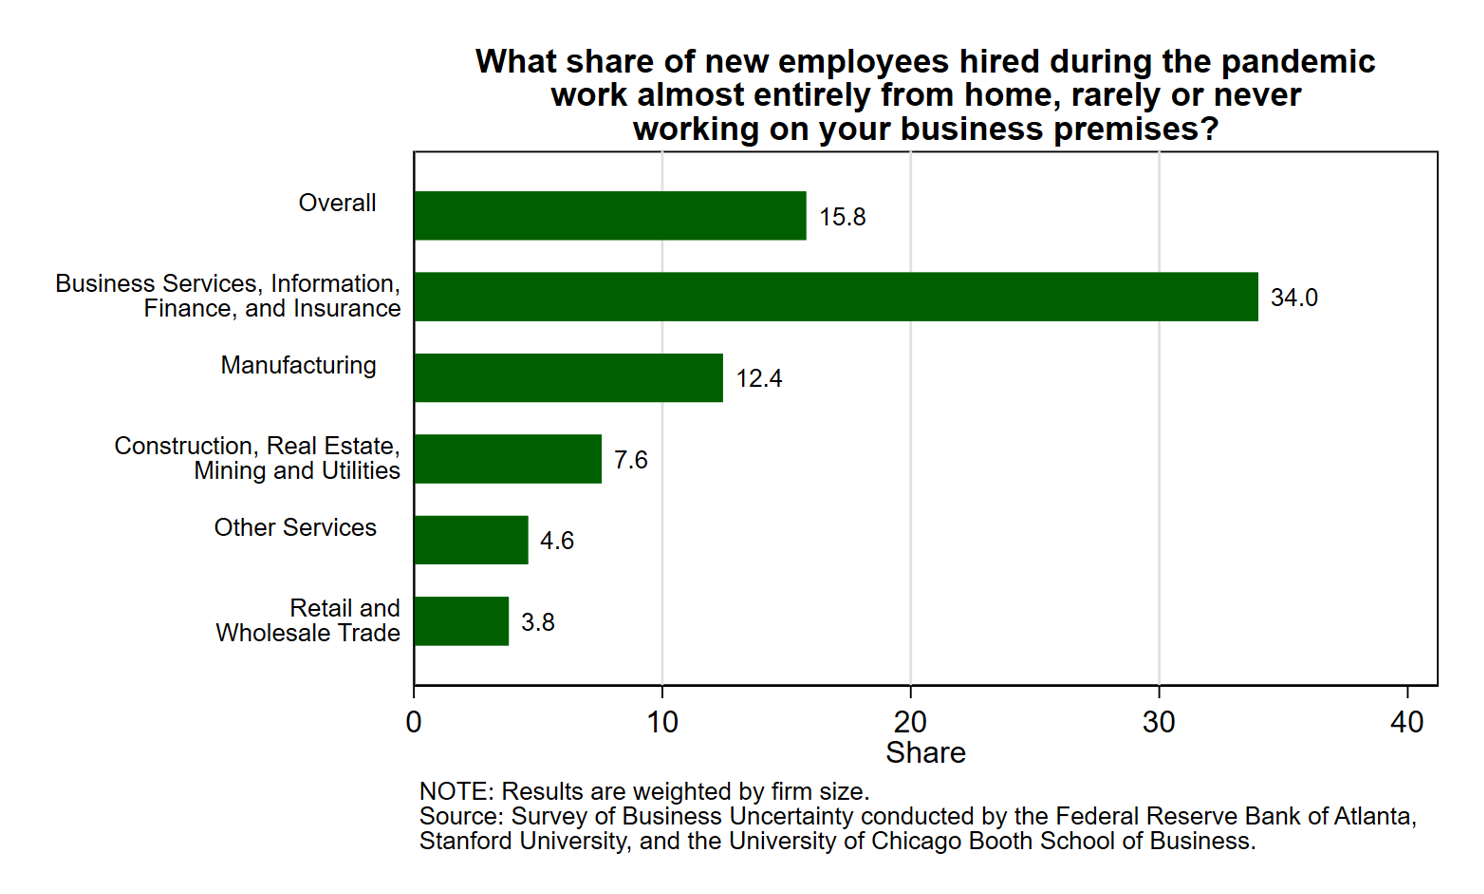 Chart 02 of 03: Share of new employees hired during pandemic work almost entirely from home